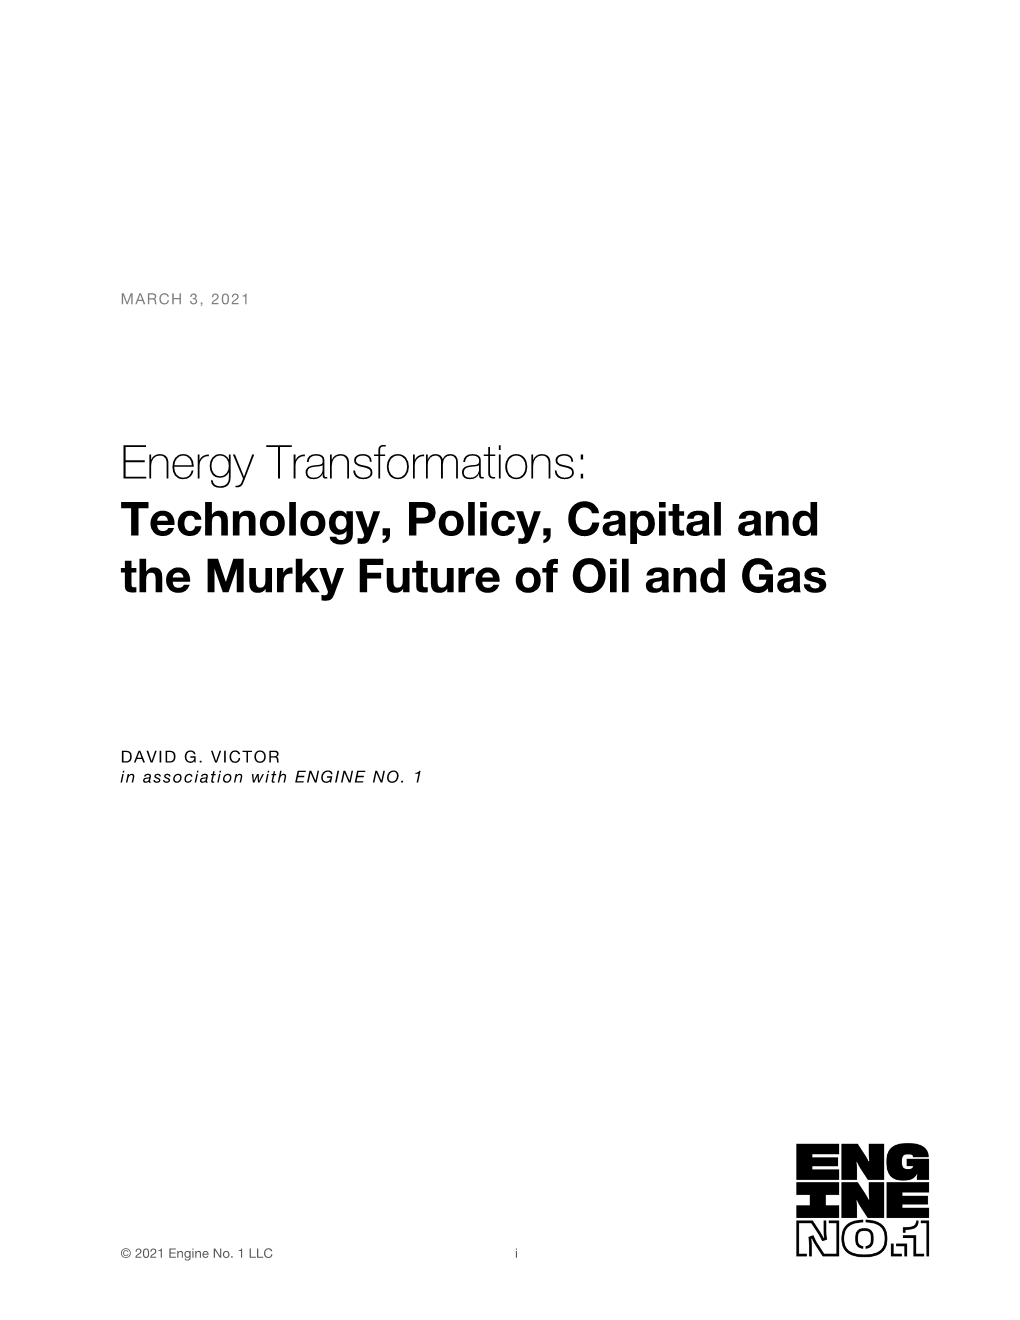 Technology, Policy, Capital and the Murky Future of Oil and Gas